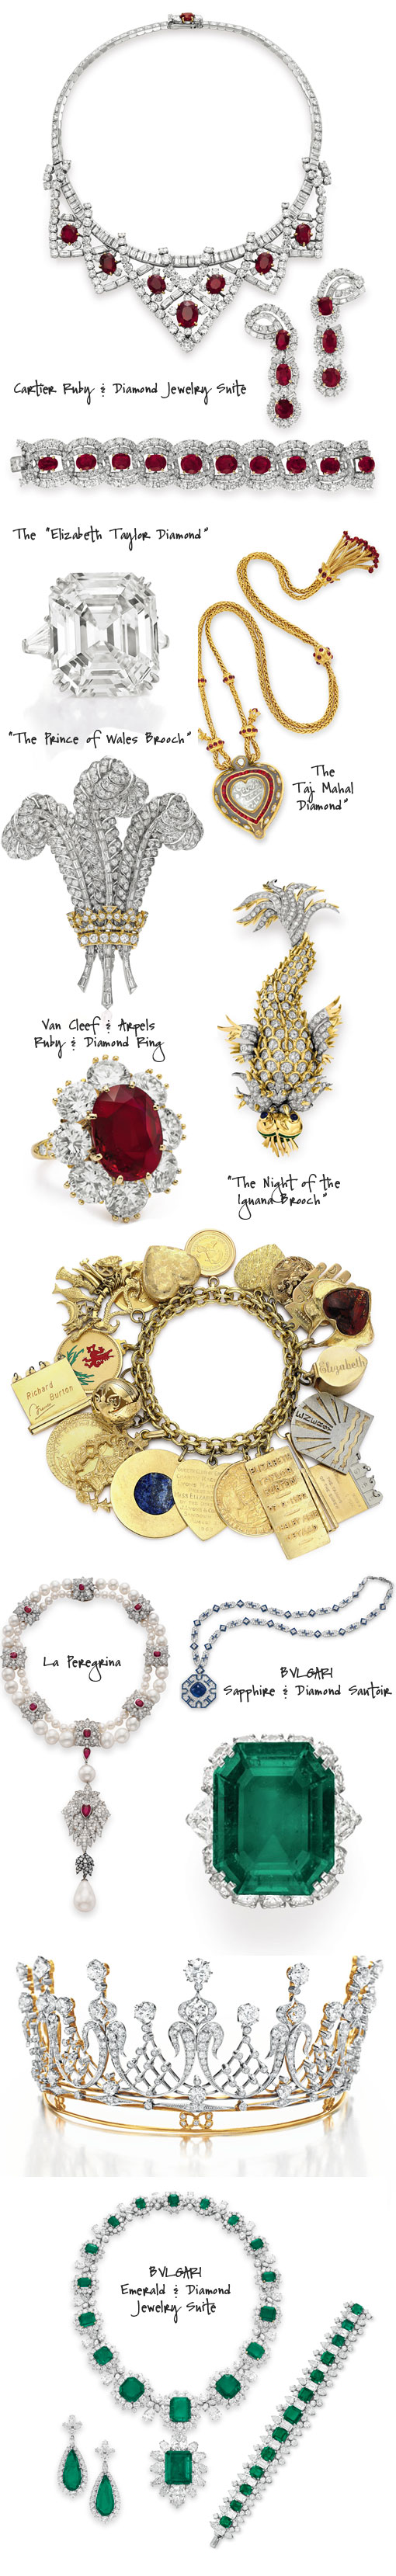 Hollywood Royalty:The Elizabeth Taylor Jewelry Collection Exhibit and Auction